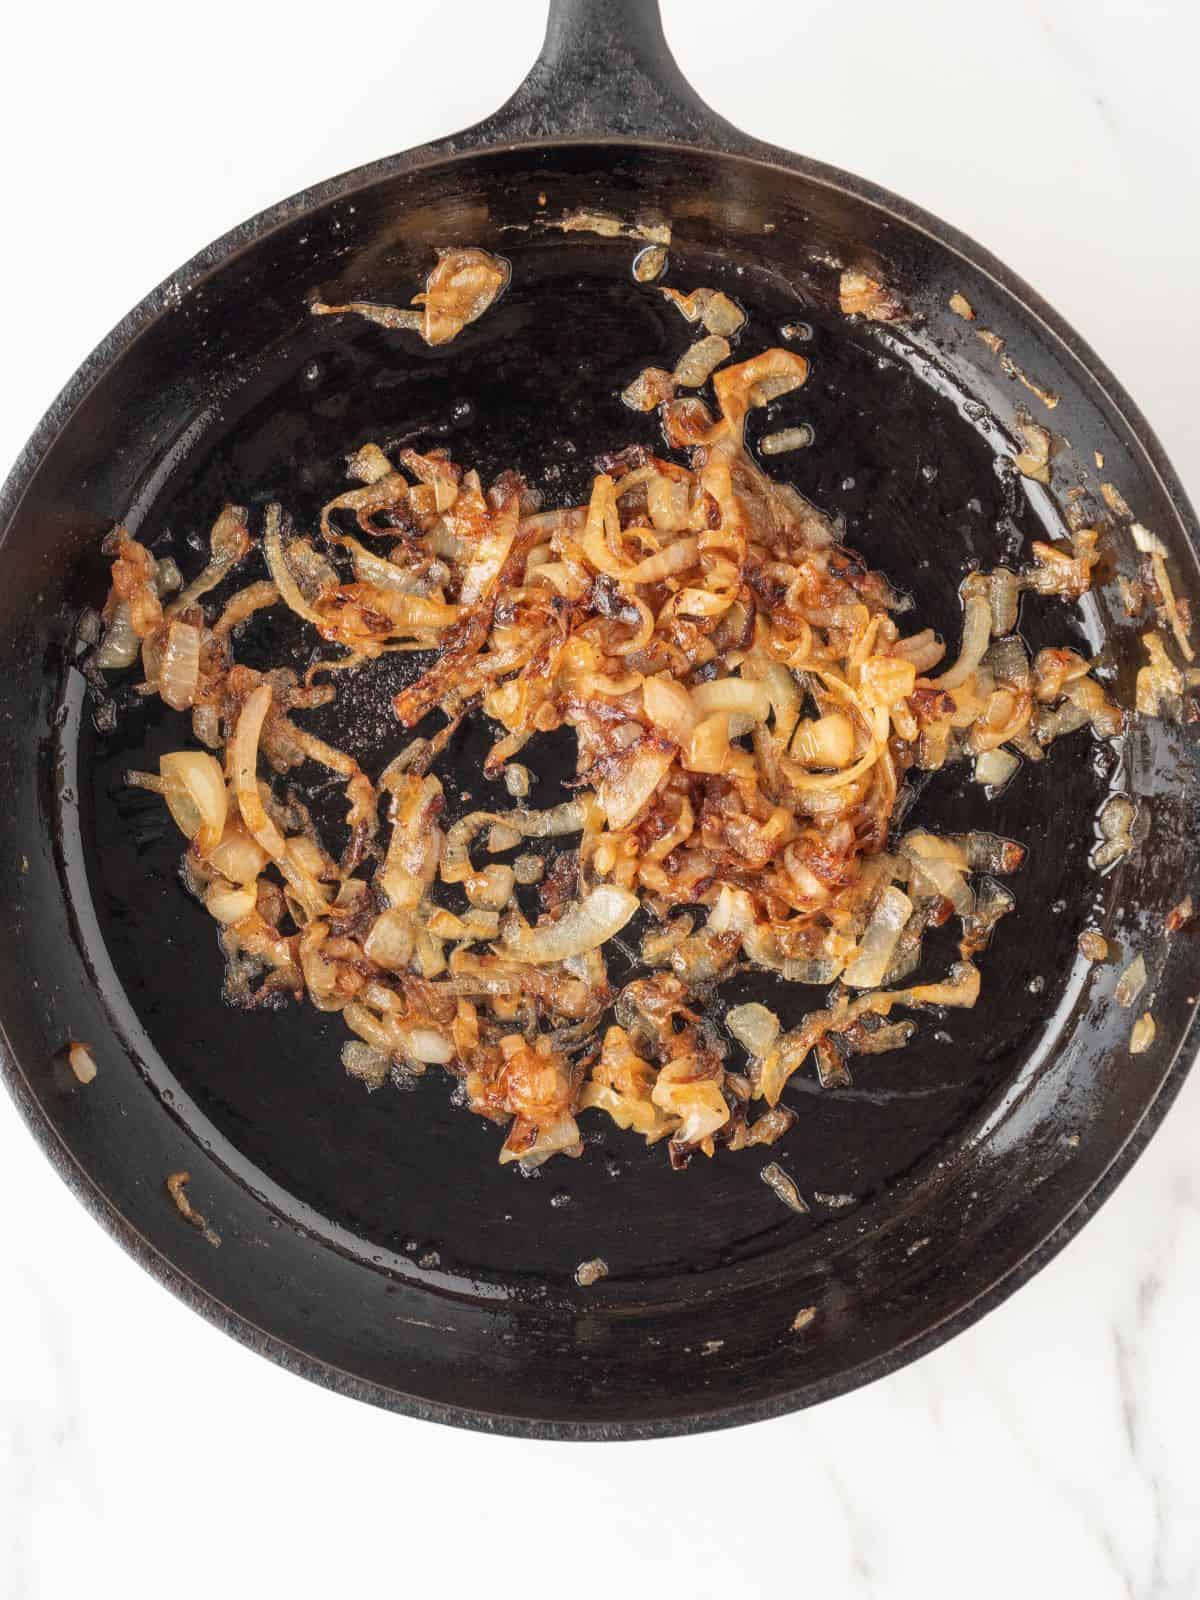 A skillet with caramelized onions.